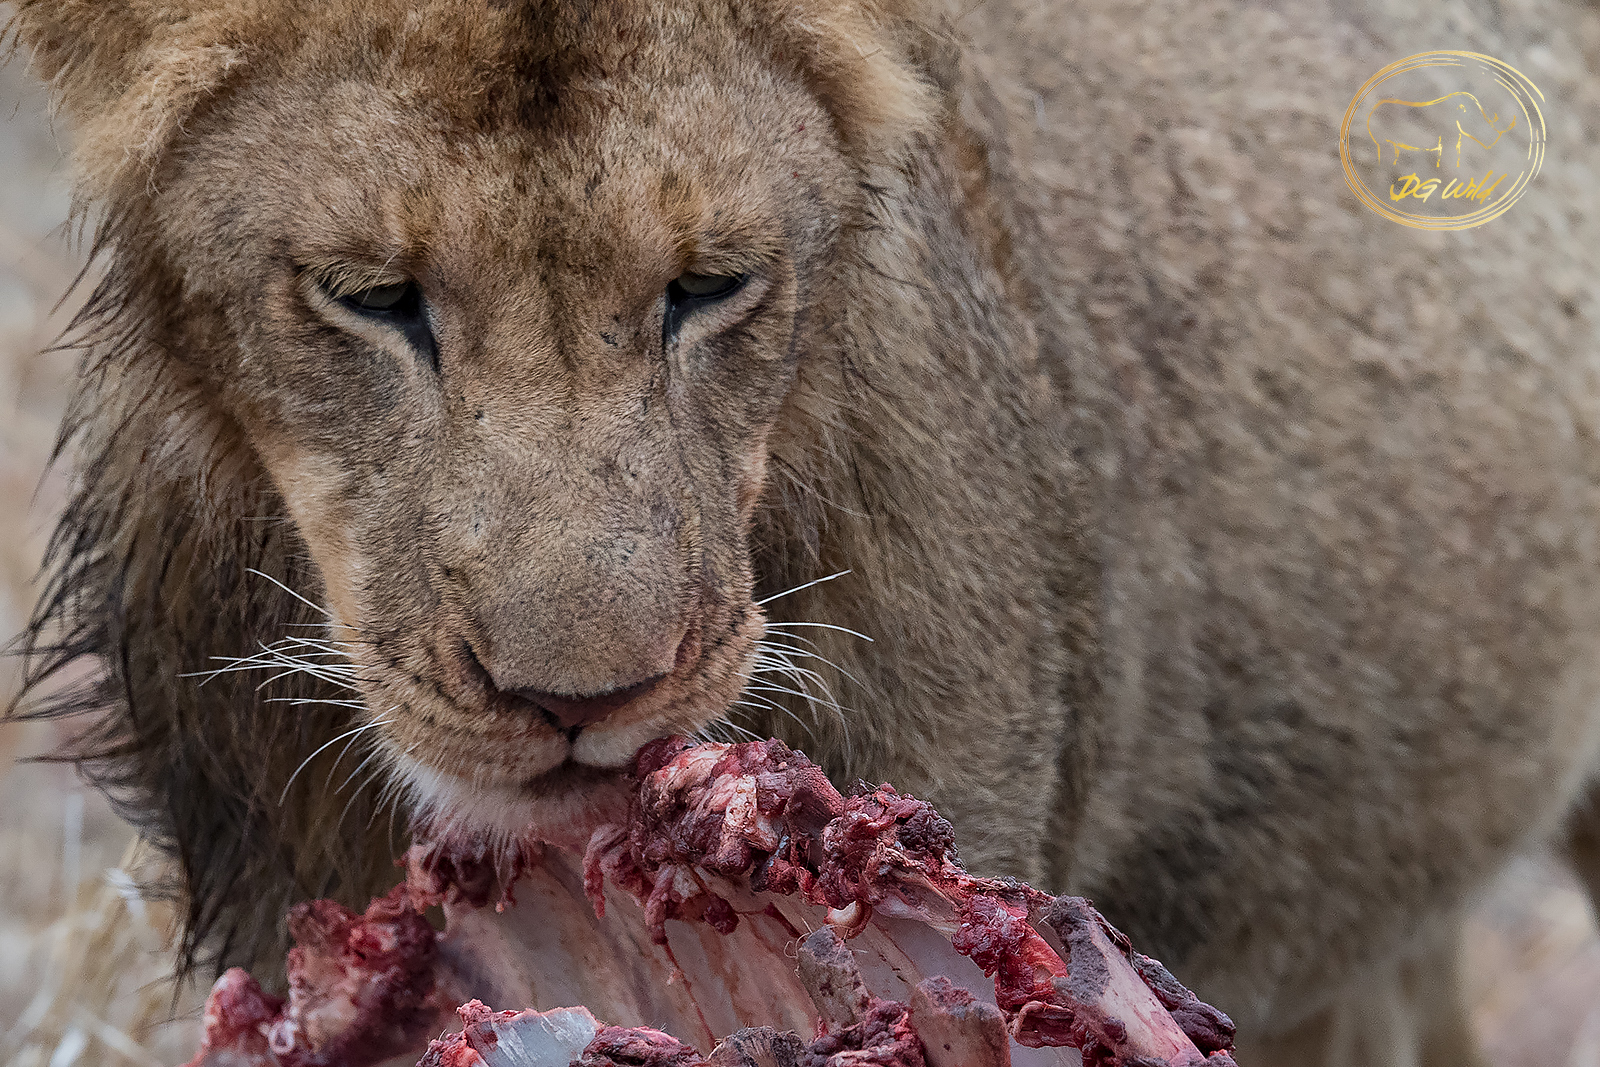 a lion eating a piece of meat